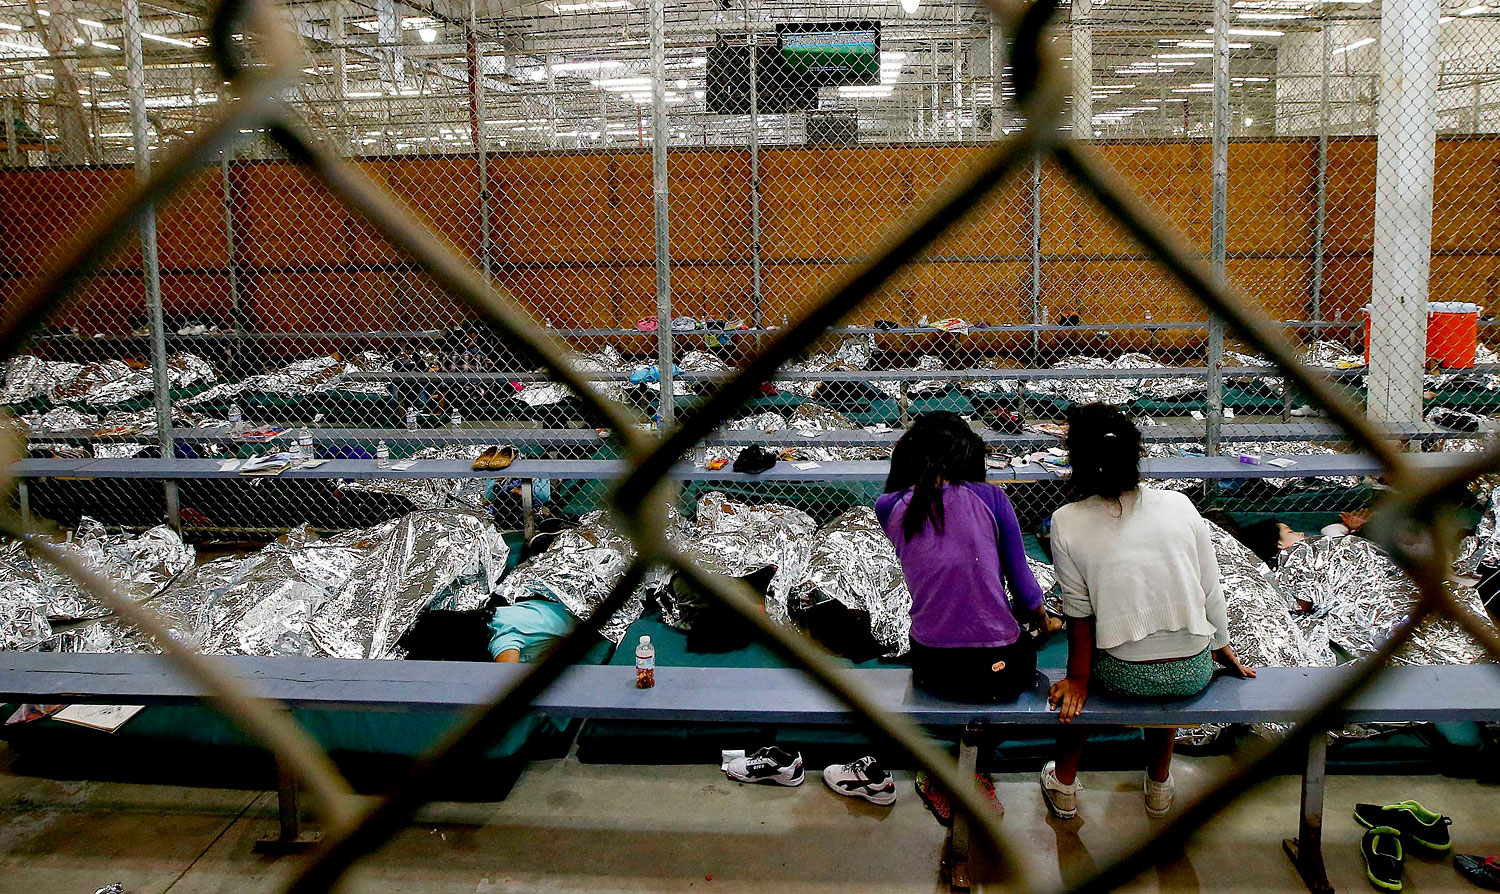 Two young girls watch a World Cup soccer match on a television from their holding area where hundreds of mostly Central American immigrant children are being processed and held at the U.S. Customs and Border Protection Nogales Placement Center in Nogales